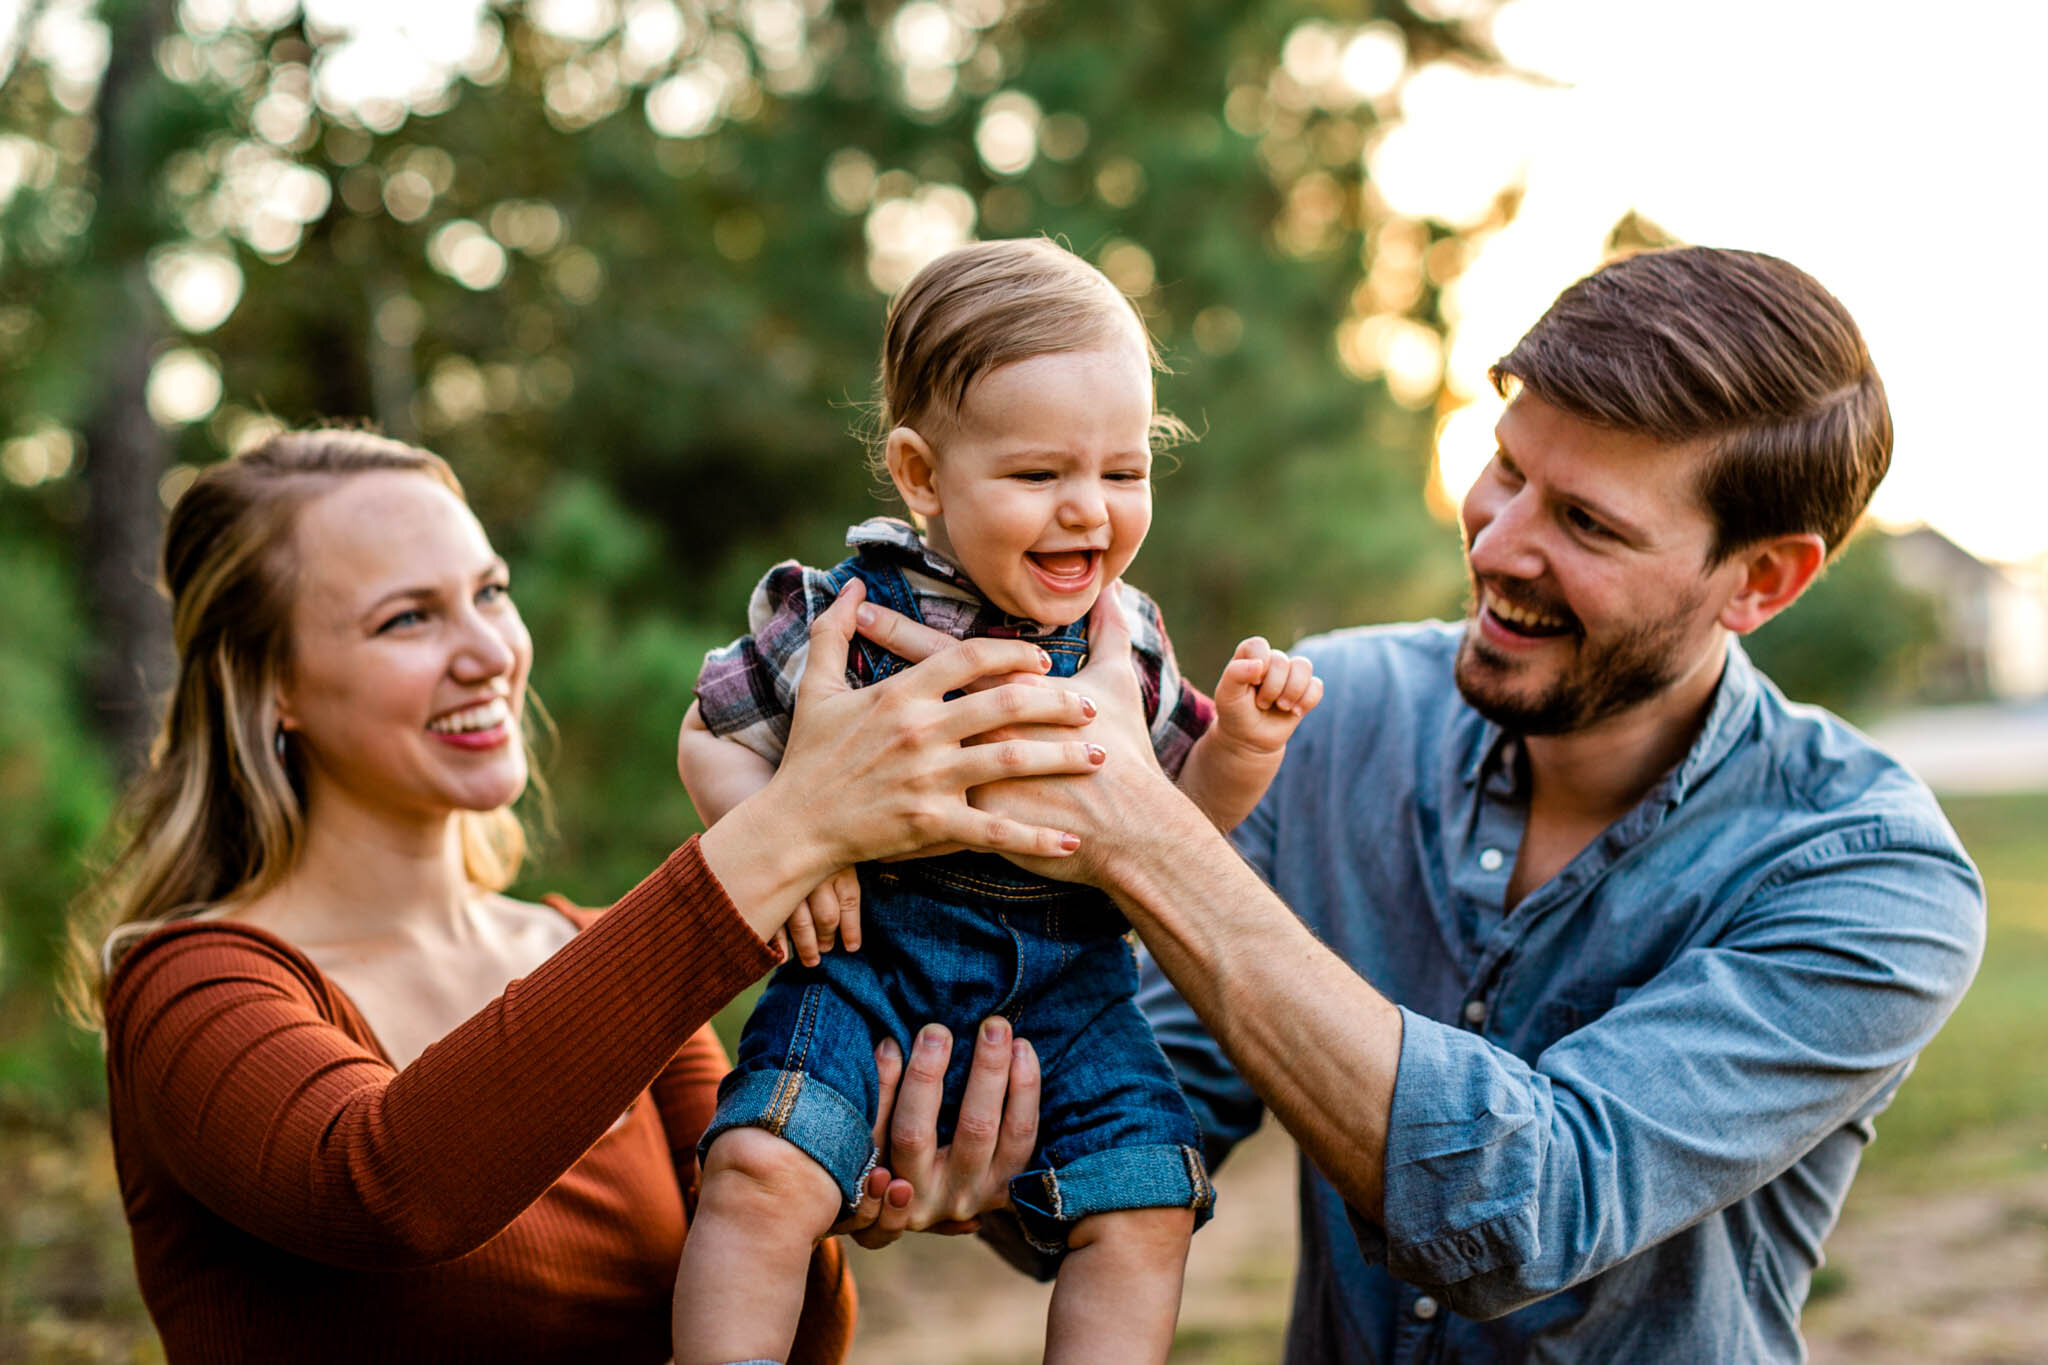 Durham Family Photographer | By G. Lin Photography | Mom and dad holding baby boy in the air and laughing